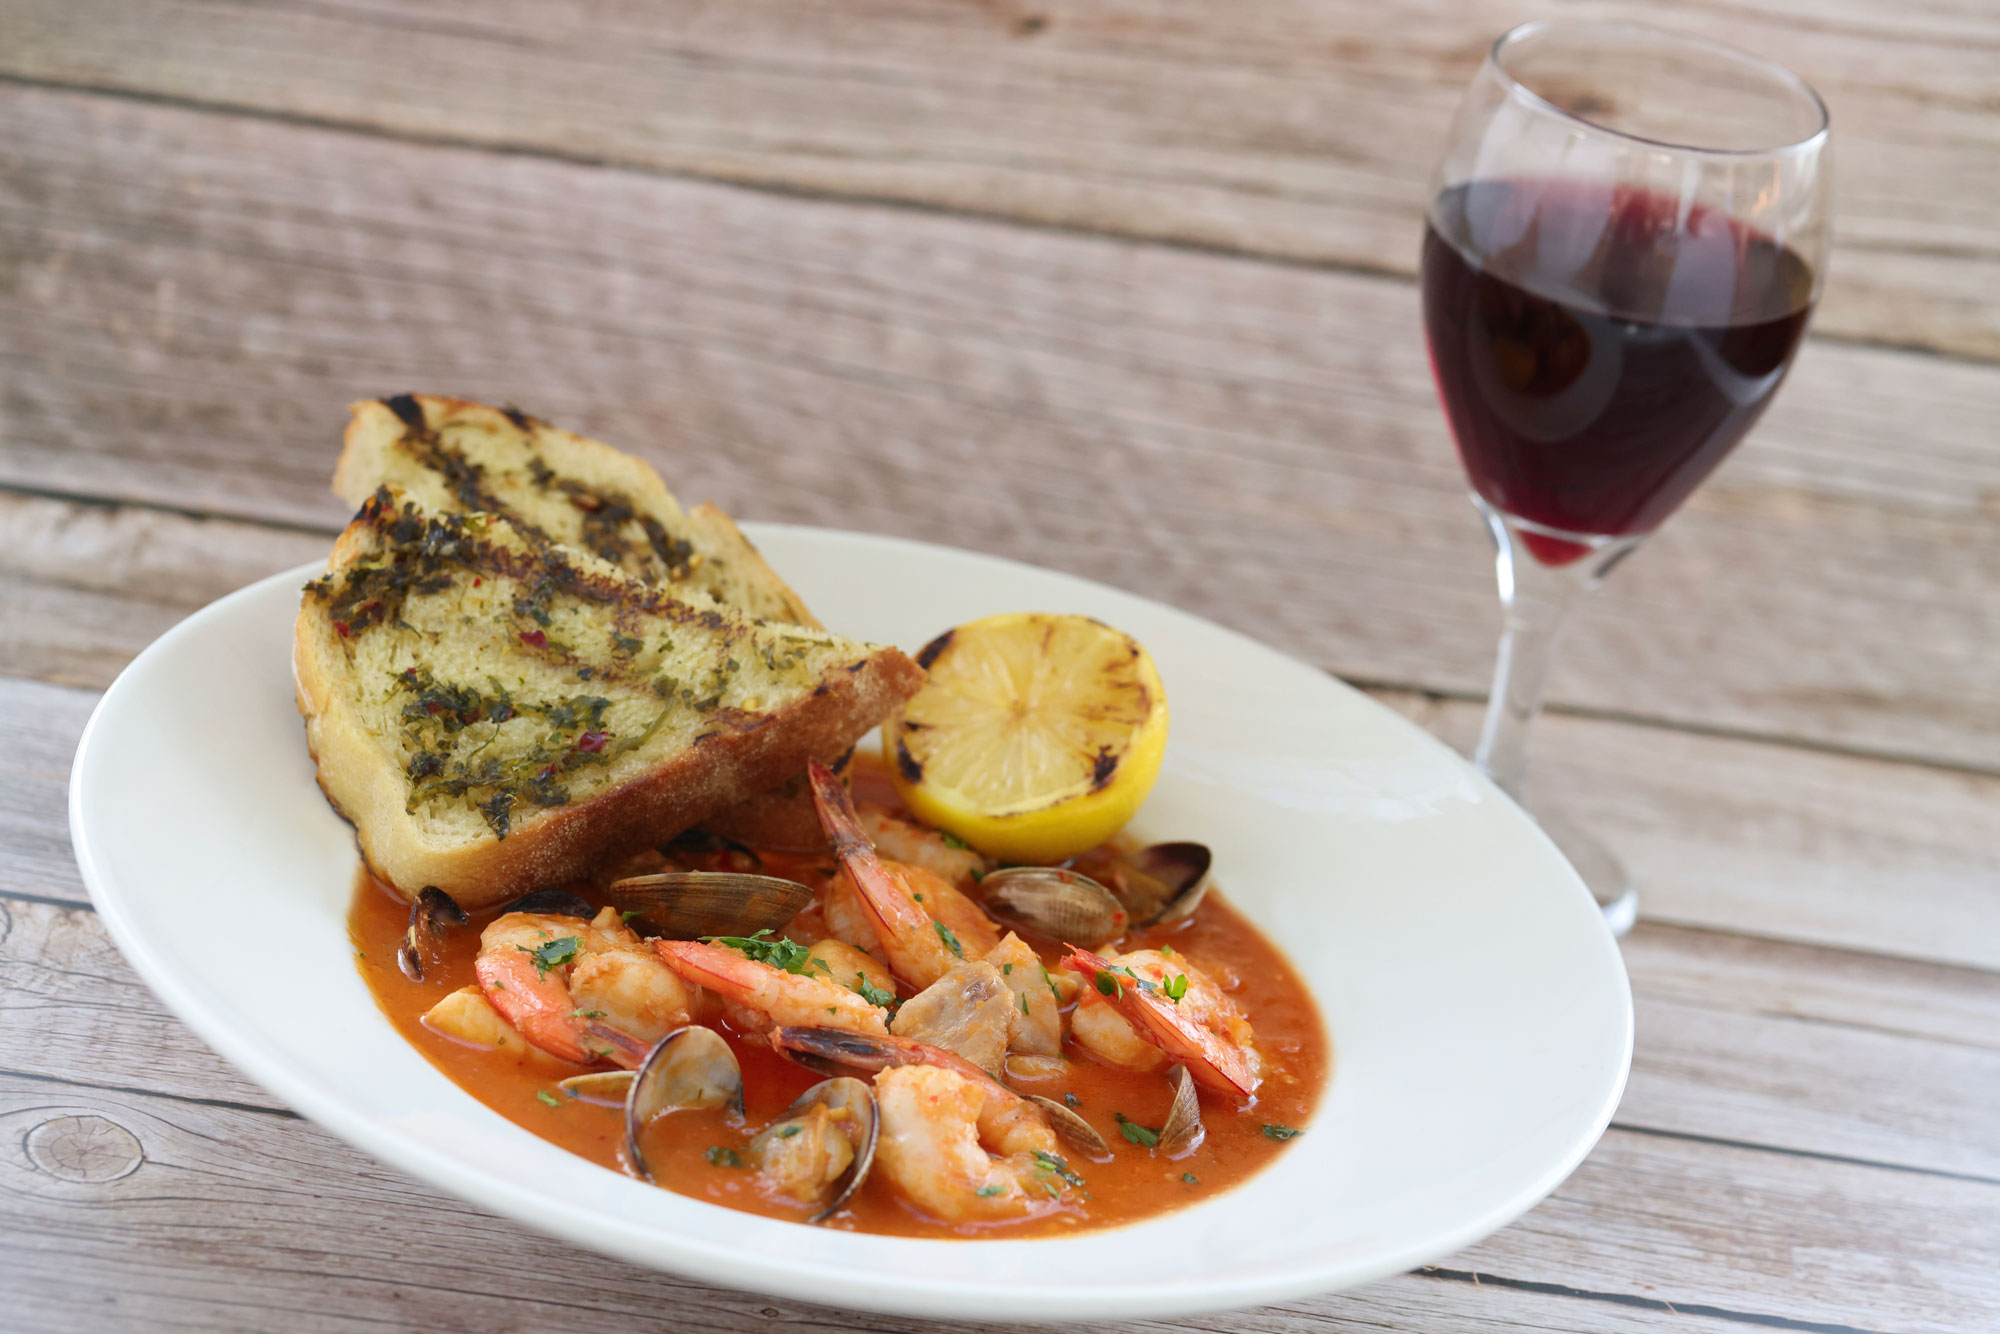 Salty's at the SEA cioppino, buttered toast, and red wine